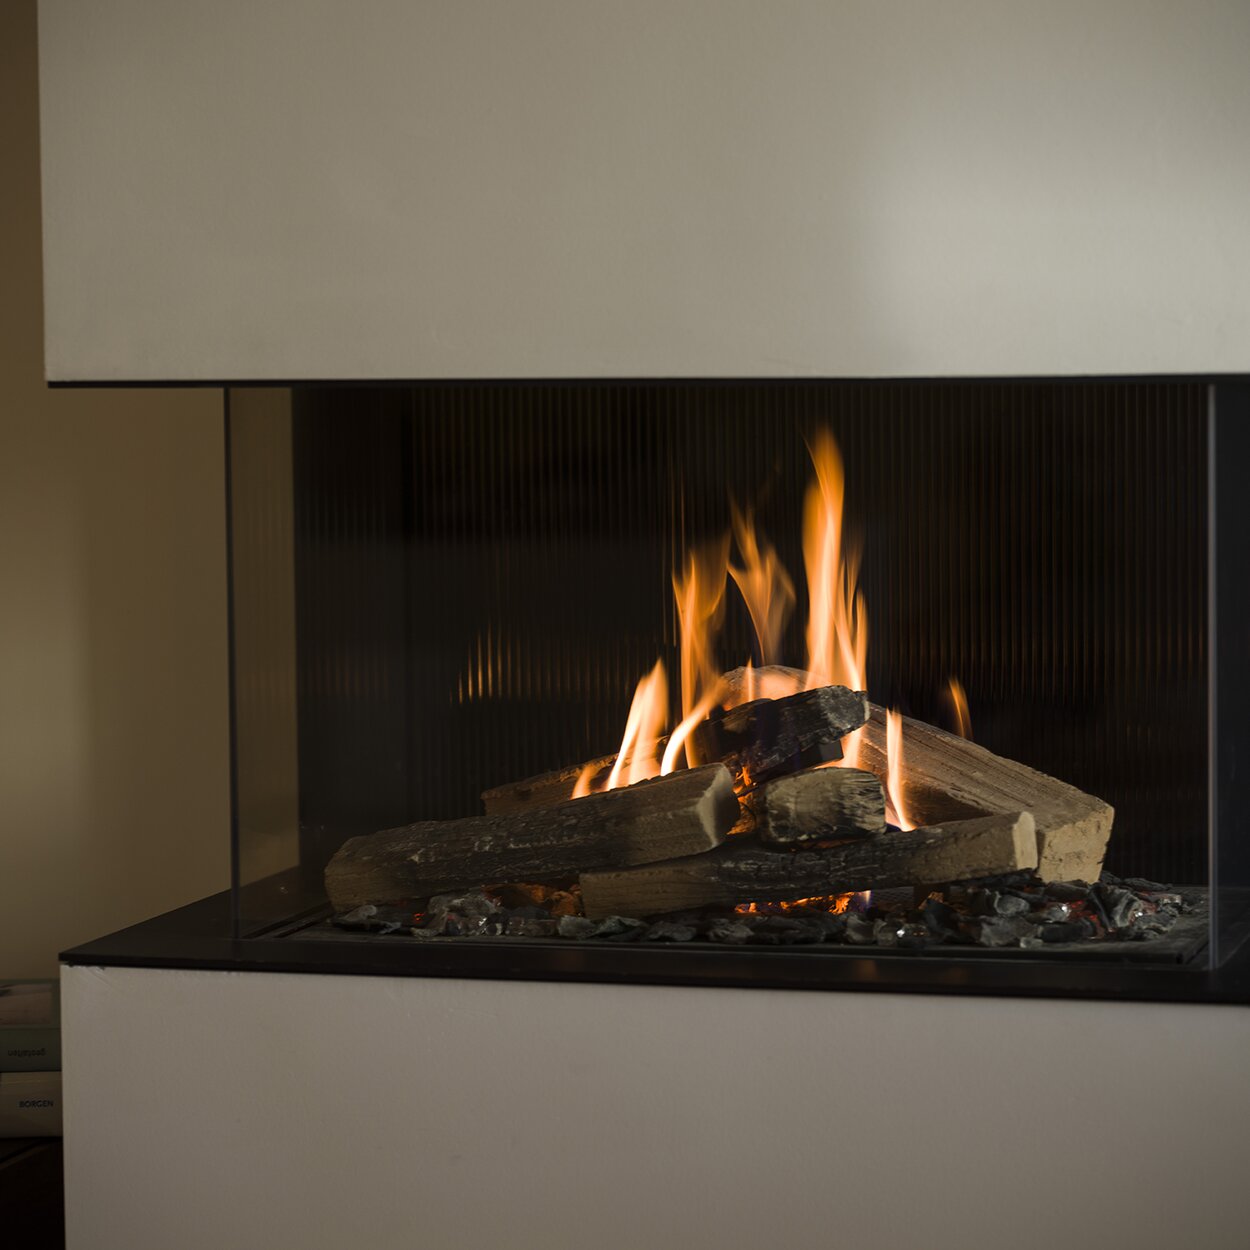 VISIO 90 3S gas fireplace as a 3-sided fireplace with elegant design firebox lining and quiet gas flame